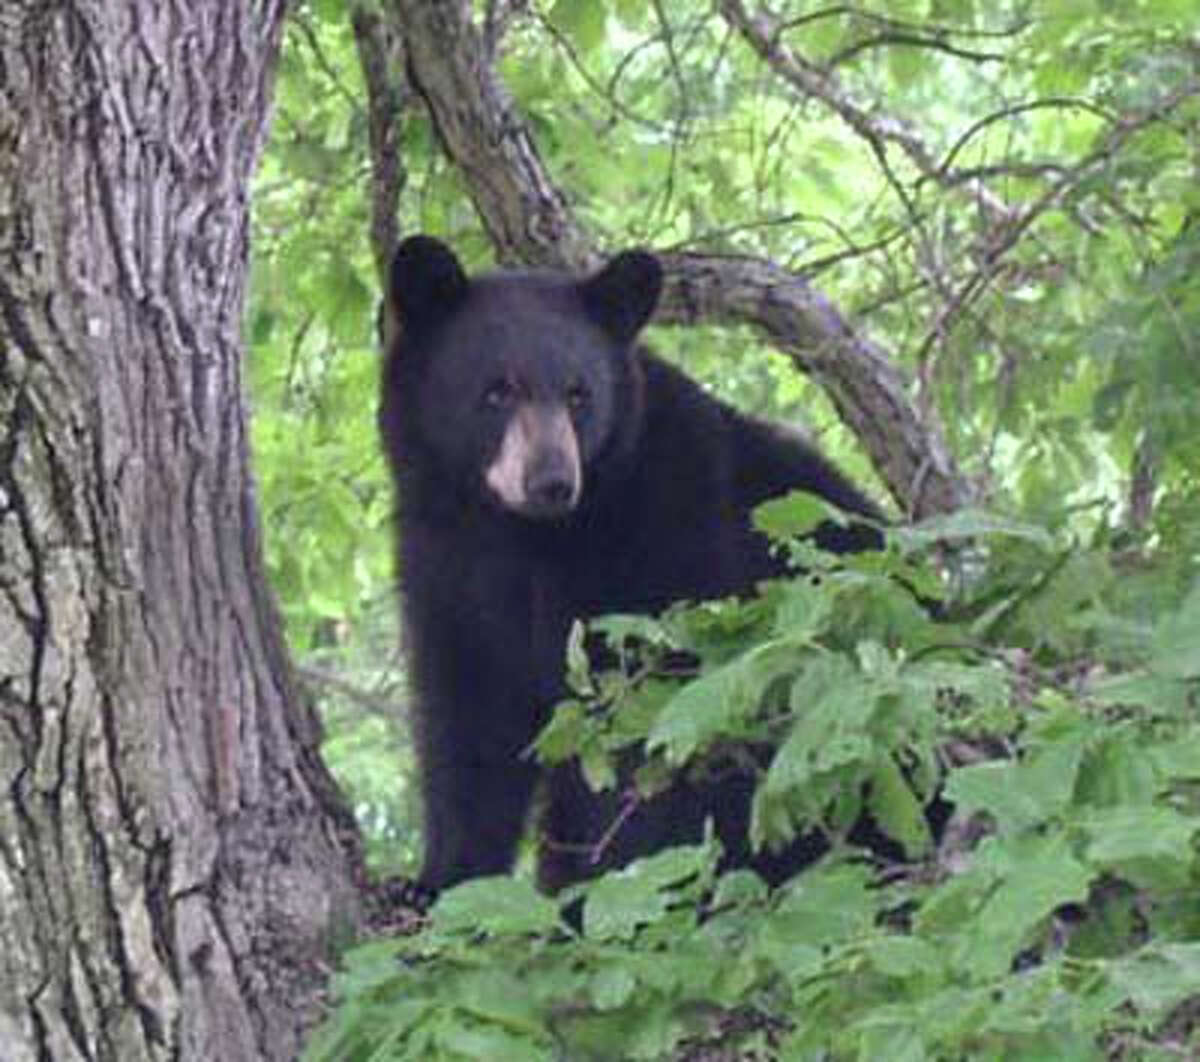 Black bears have yet to be sighted in the Big Thicket National Preserve, but they are in East Texas. Thursday, April 21, there will be a presentation at 6:30 p.m. about black bears in the Big Thicket at the Visitor Center, 6044 FM 420, Kountze. (409) 951-6700. Learn about the history and ecology of black bears in Southeast Texas at this evening program.